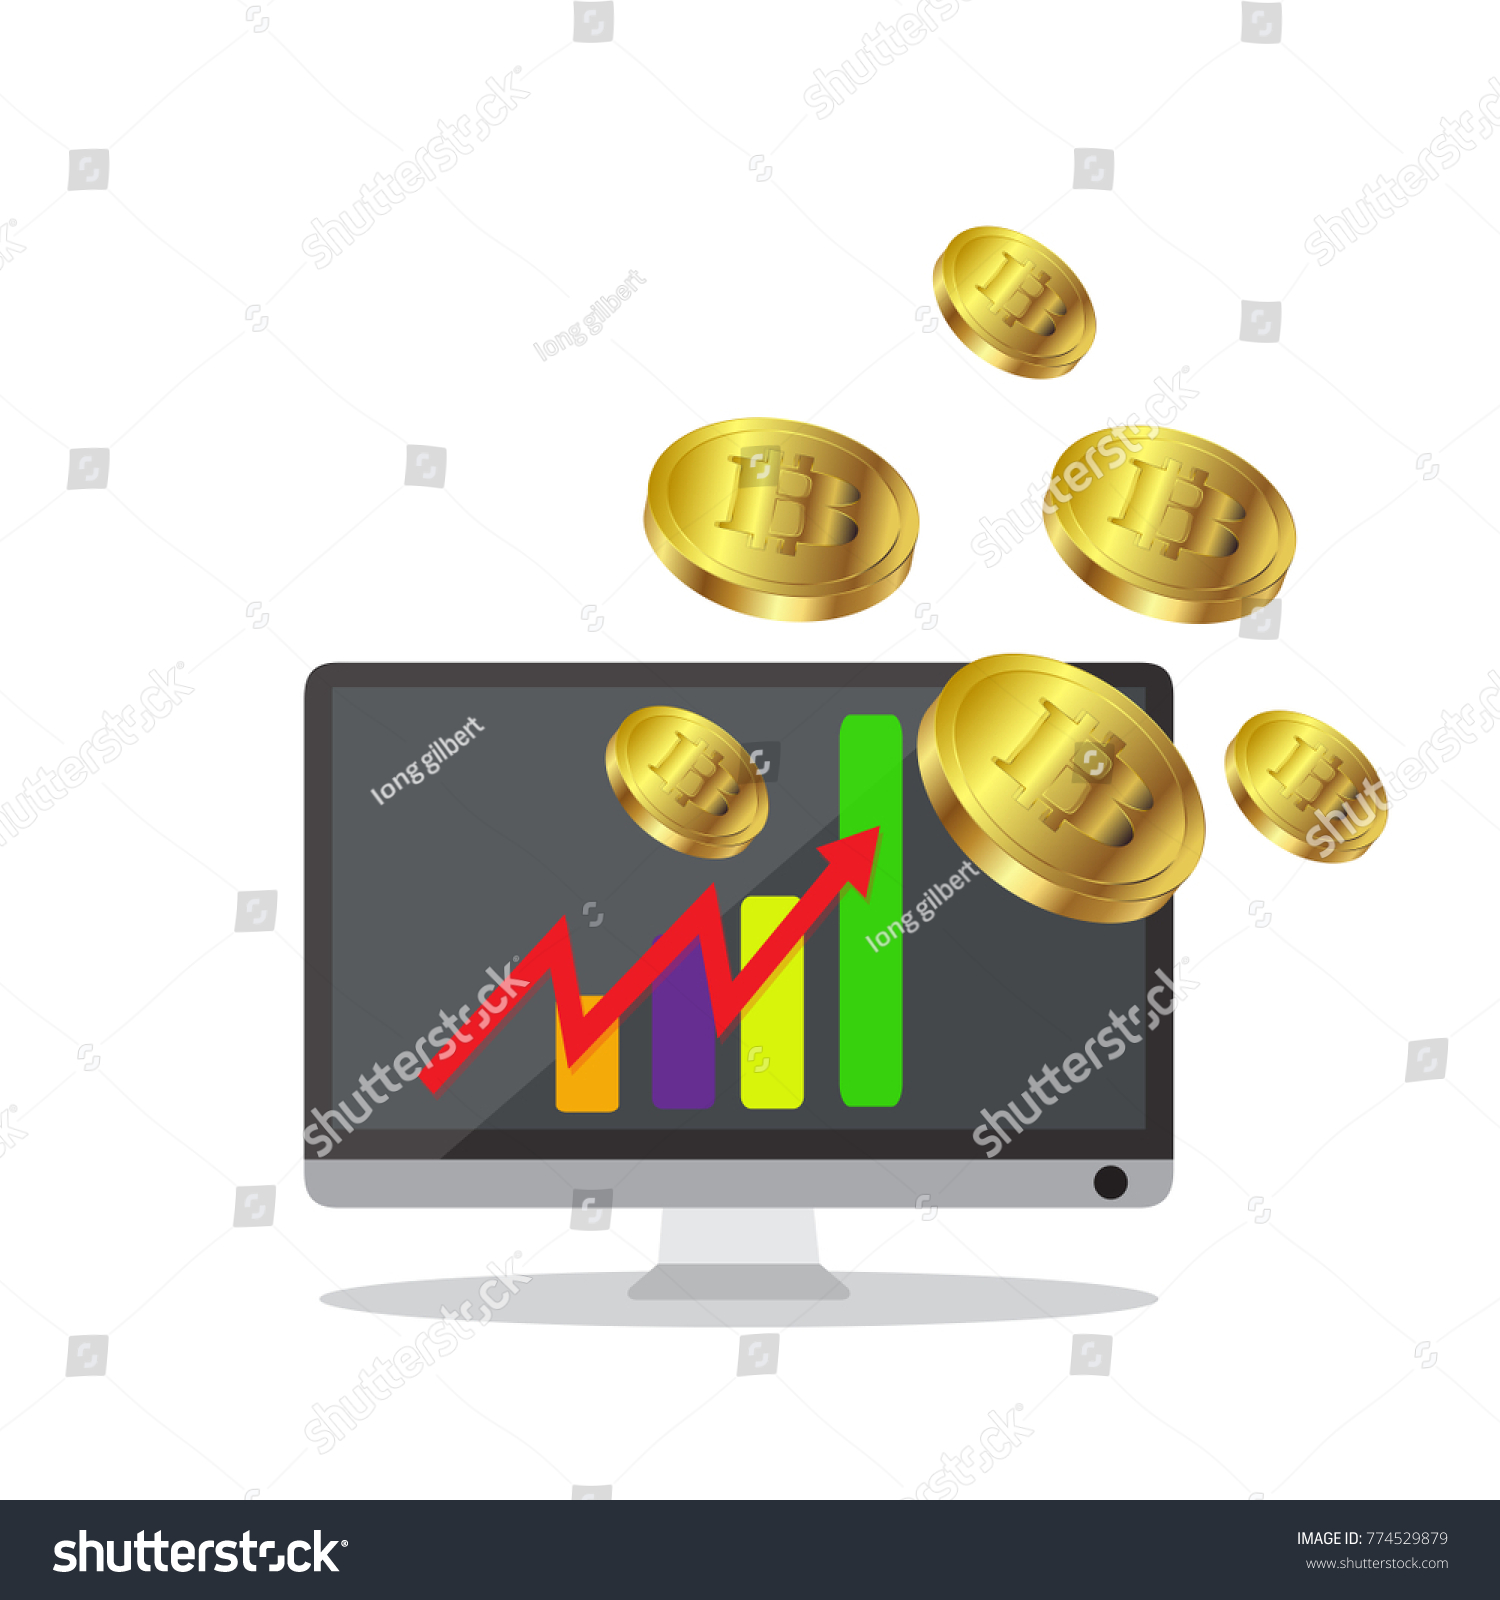 SVG of Bitcoin growth concept Payment and trade on computer symbol Bitcoin revenue illustration Stacks of gold coins like income graph with bitcoinVector illustration isolated on background svg